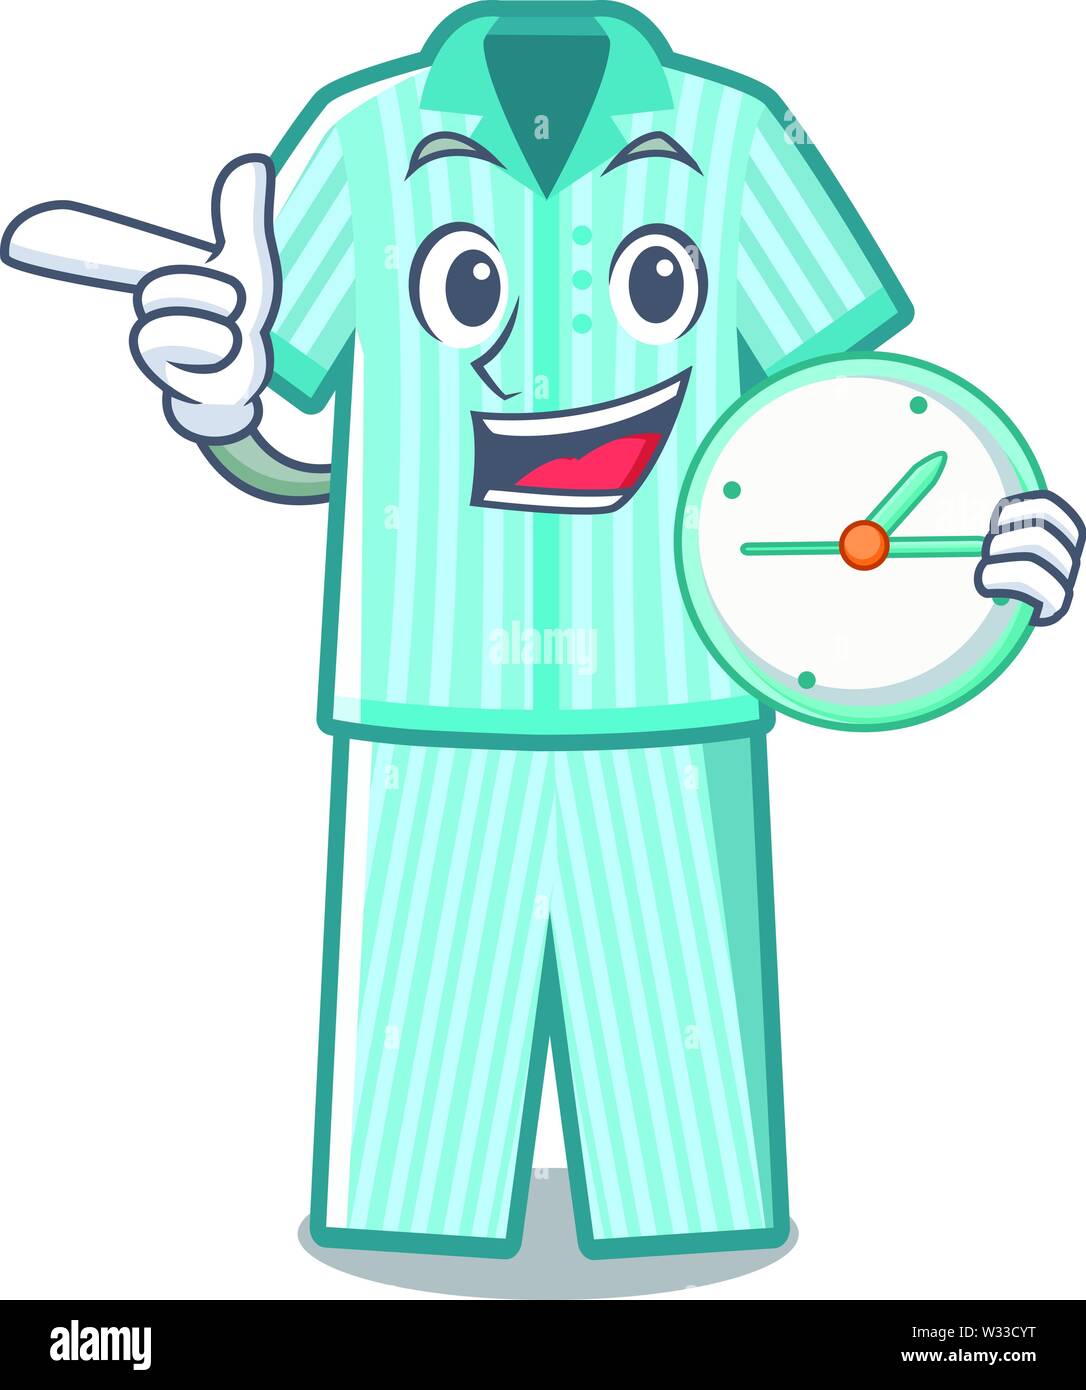 With clock pyjamas in the a mascot shape Stock Vector